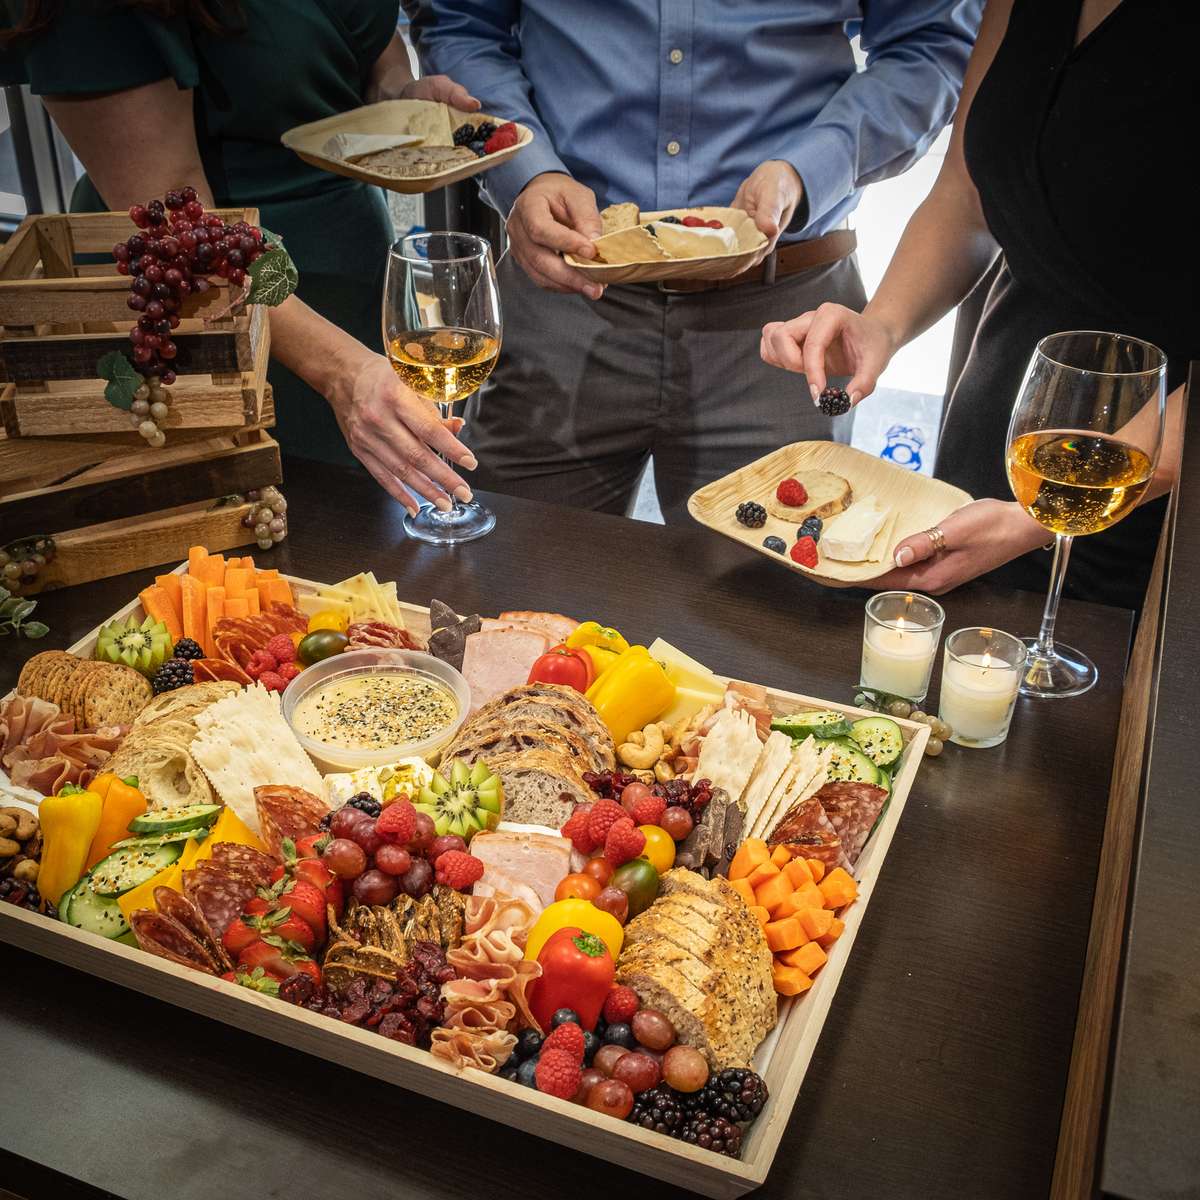 Event Here are some tips for organizing charcuterie catering for your next event: